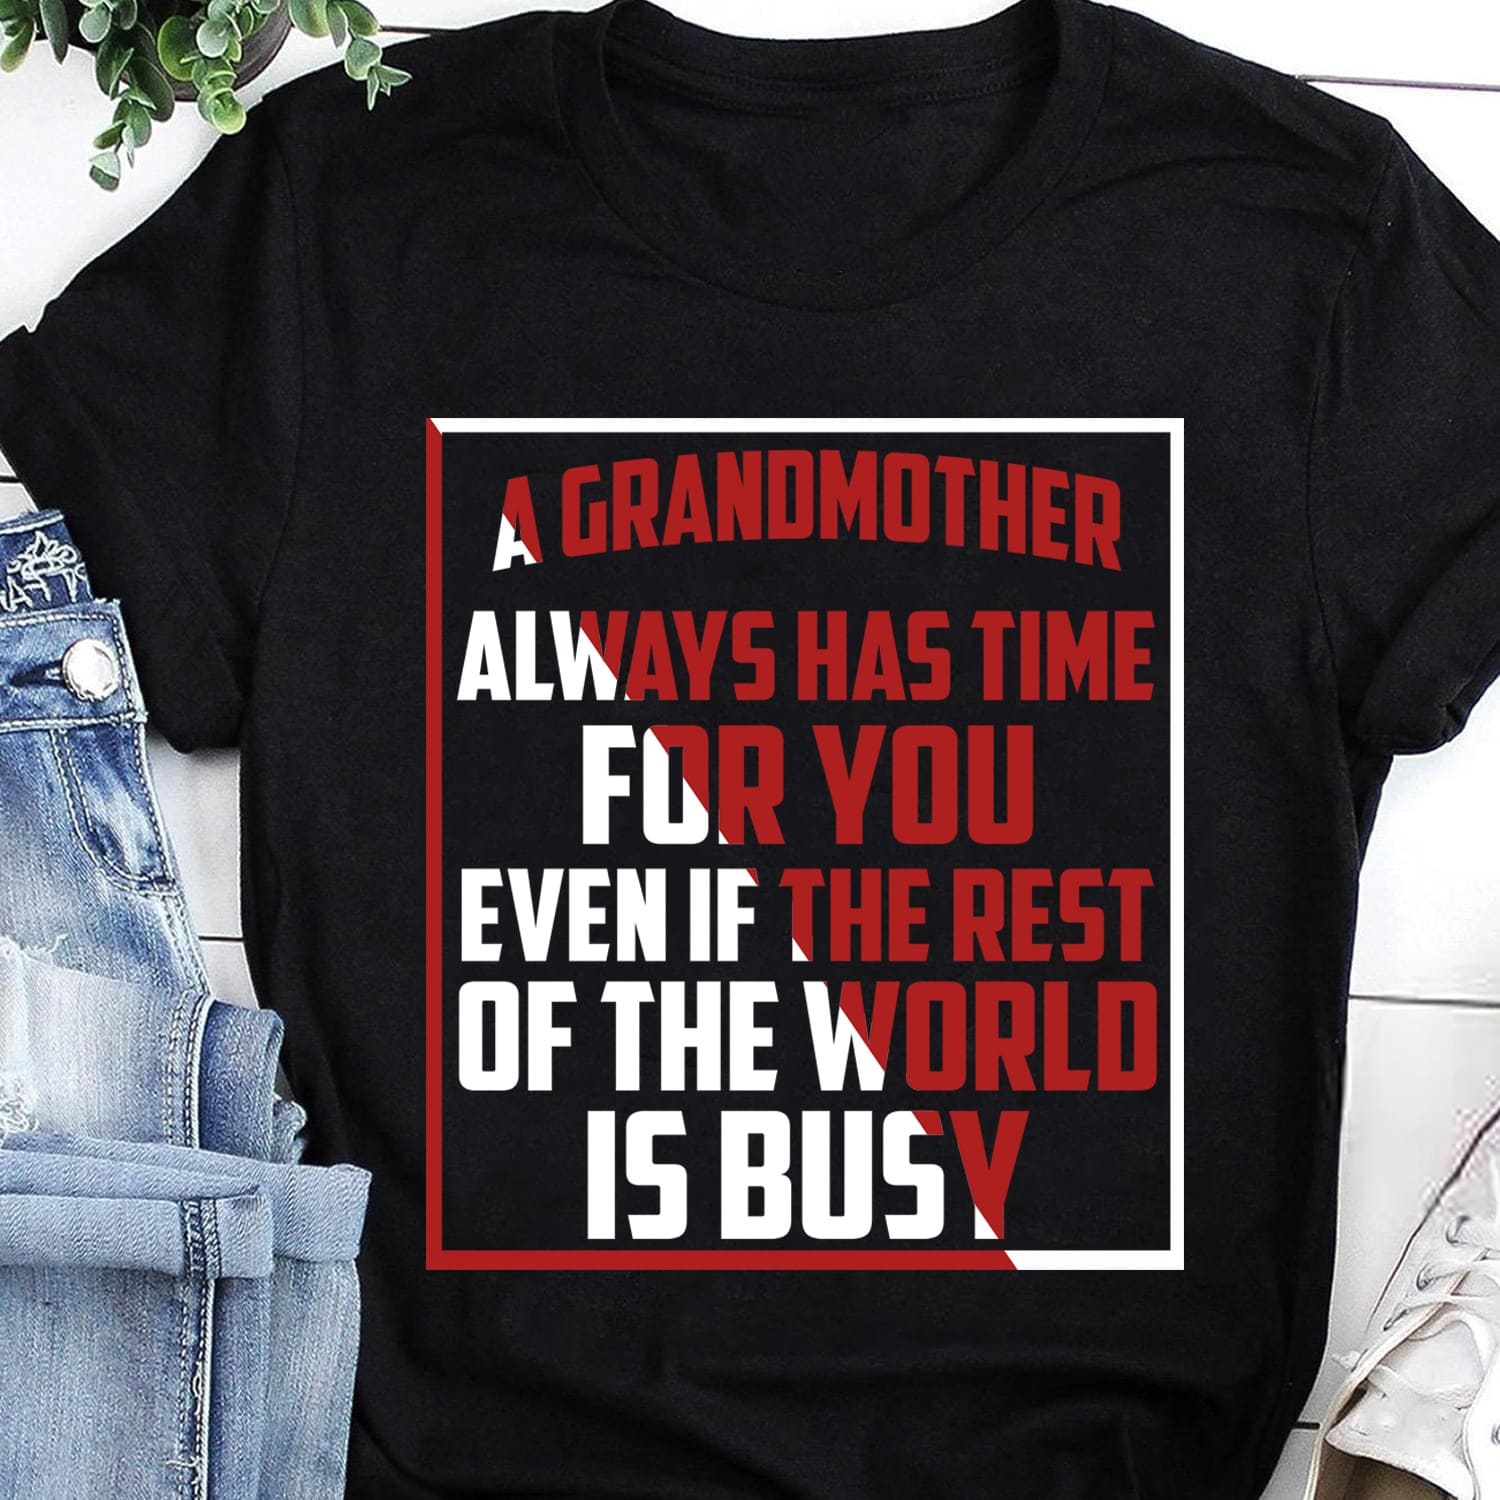 A grandmother always has time for you even if the rest of the world is busy - Granmother T-shirt